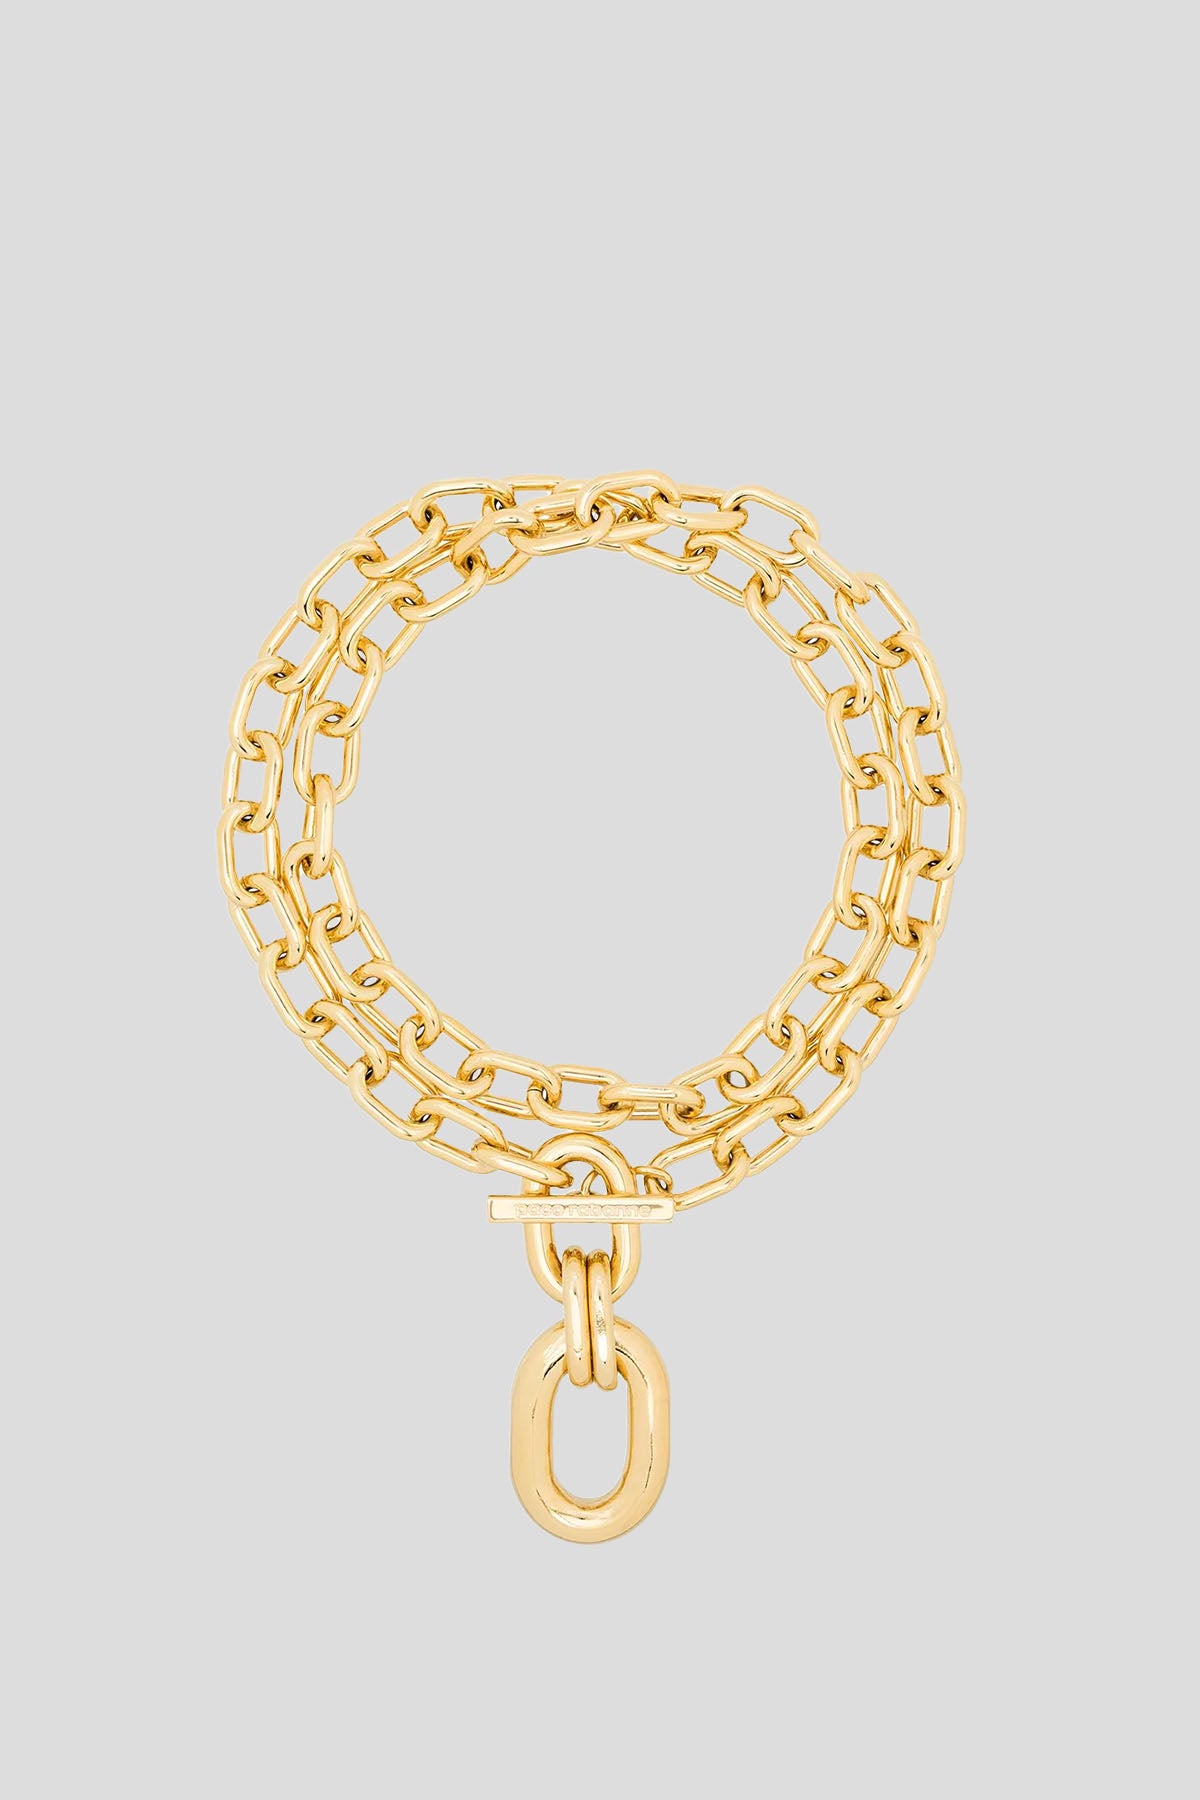 Rabanne - XL LINK DOUBLE CHAIN NECKLACE WITH GOLD PENDANT - LE LABO STORE